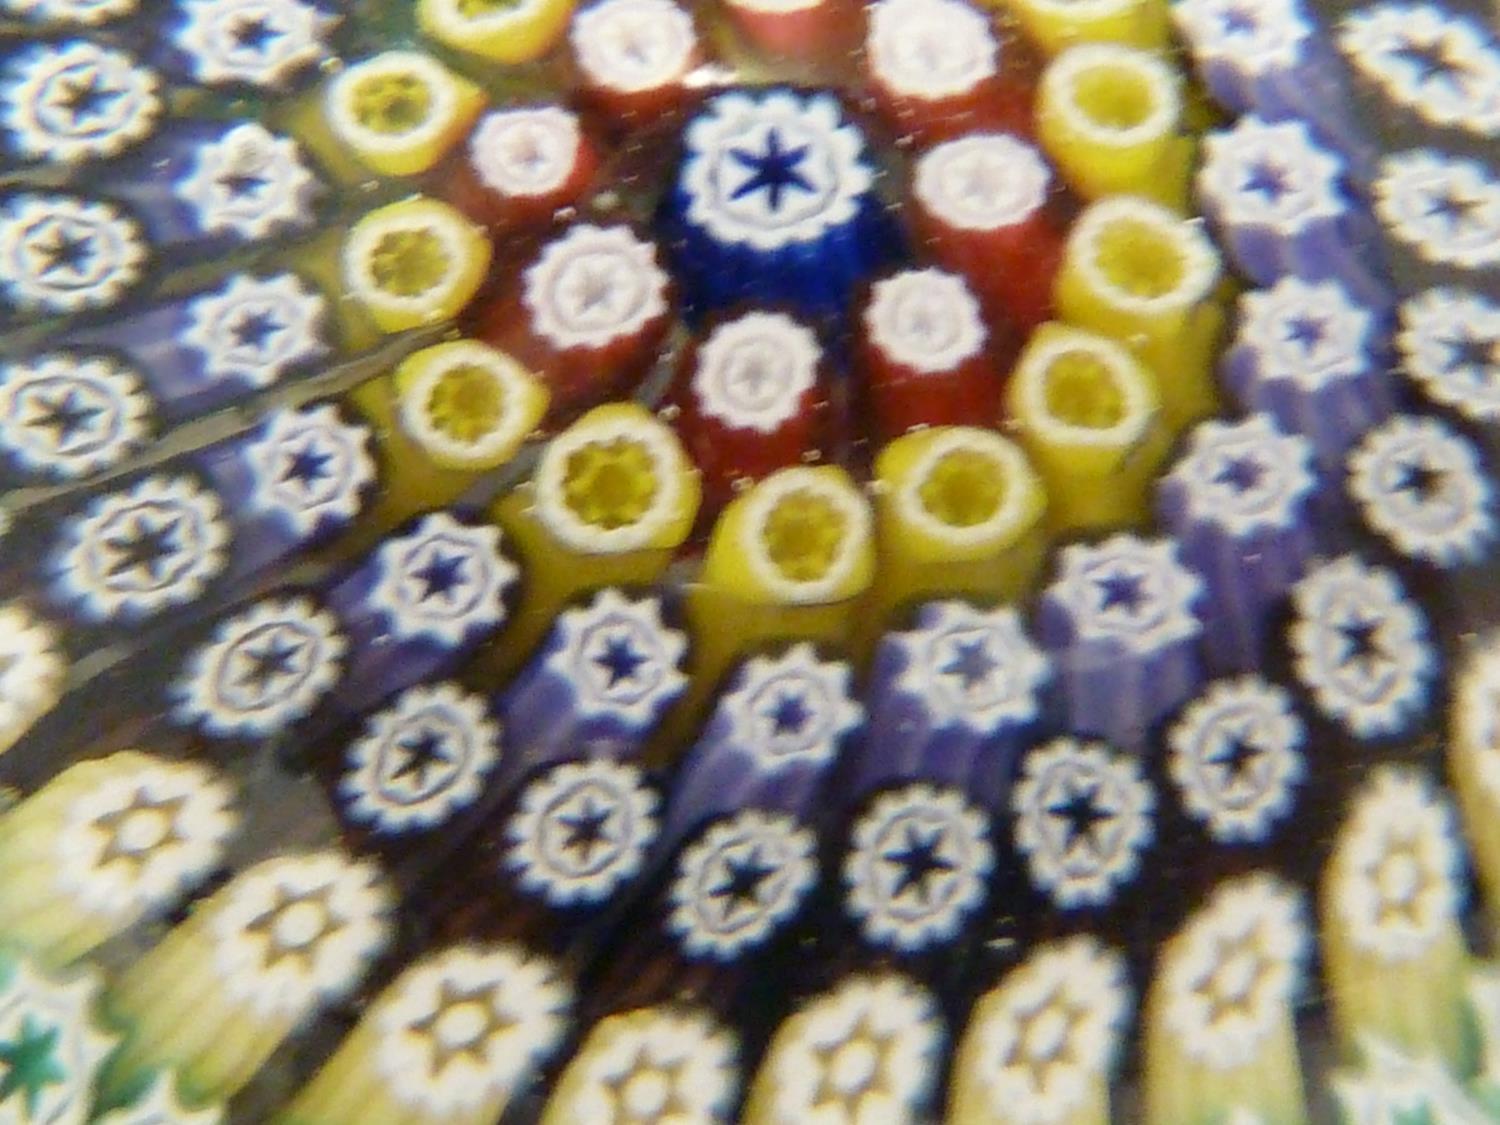 Whitefriars - a glass paperweight, concentric millifiori, canes, date cane for 1977 - Image 2 of 4